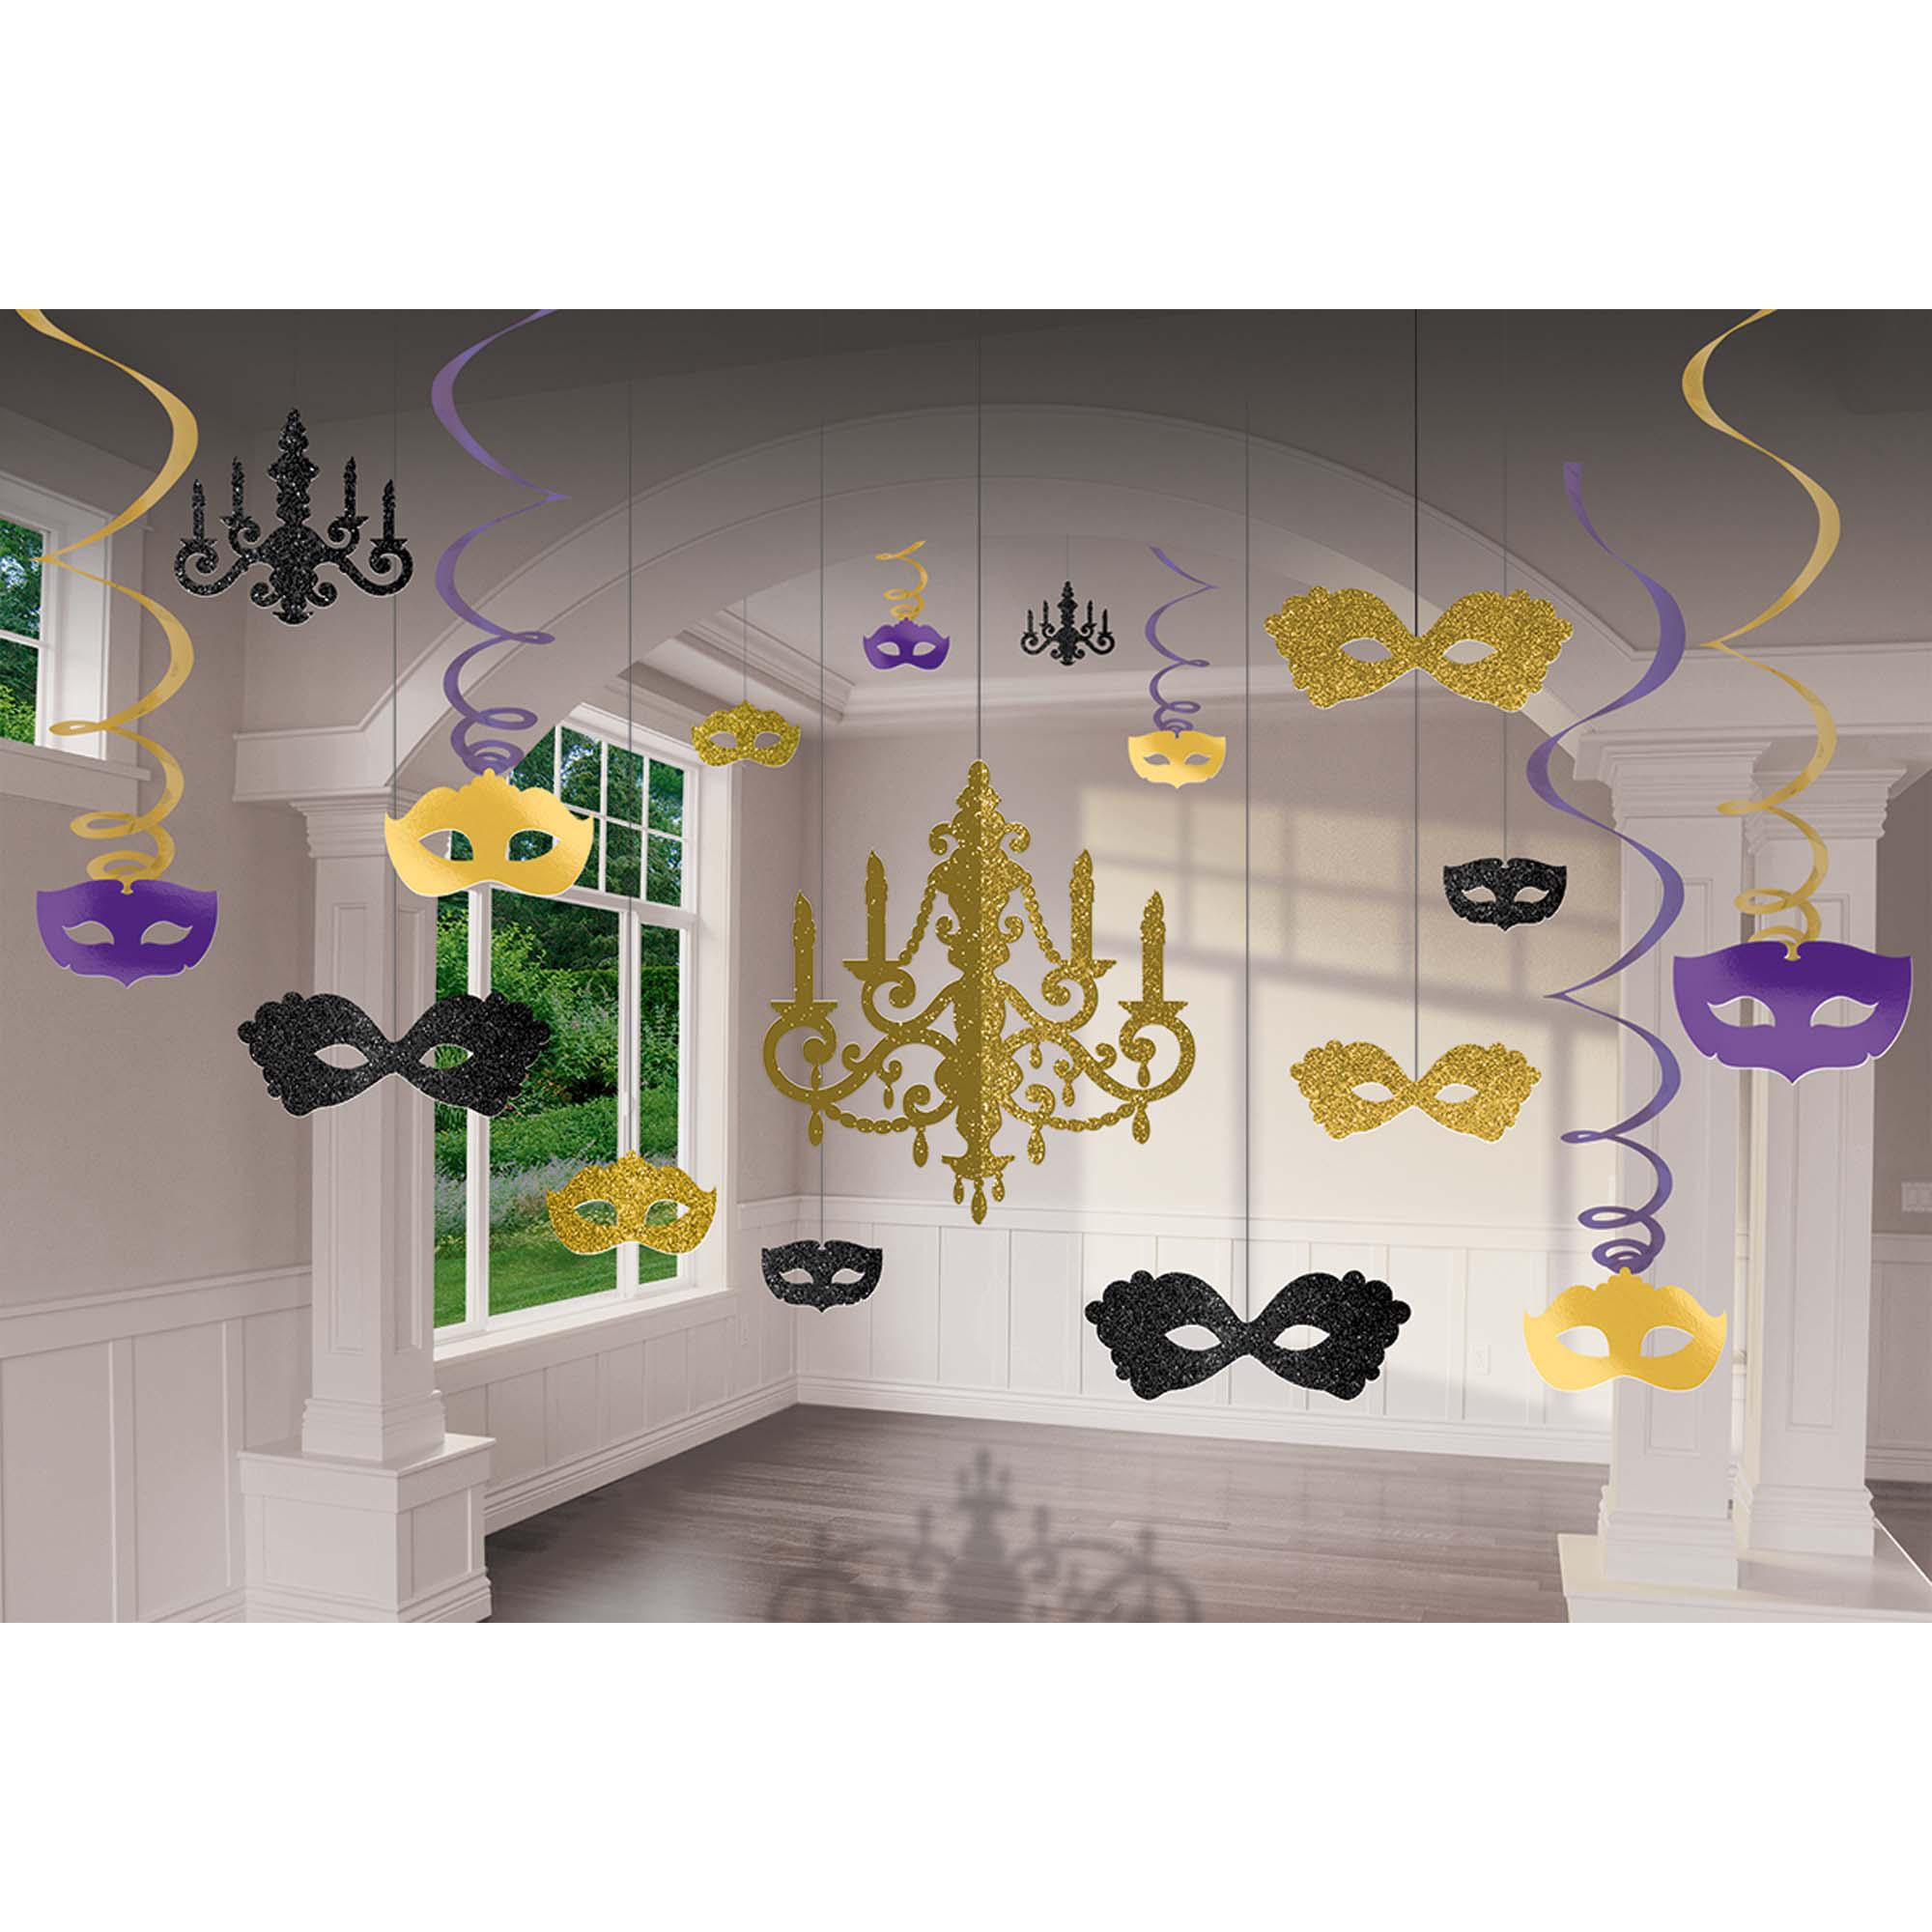 A Night In Disguise Chandelier Decorating Kit Decorations - Party Centre